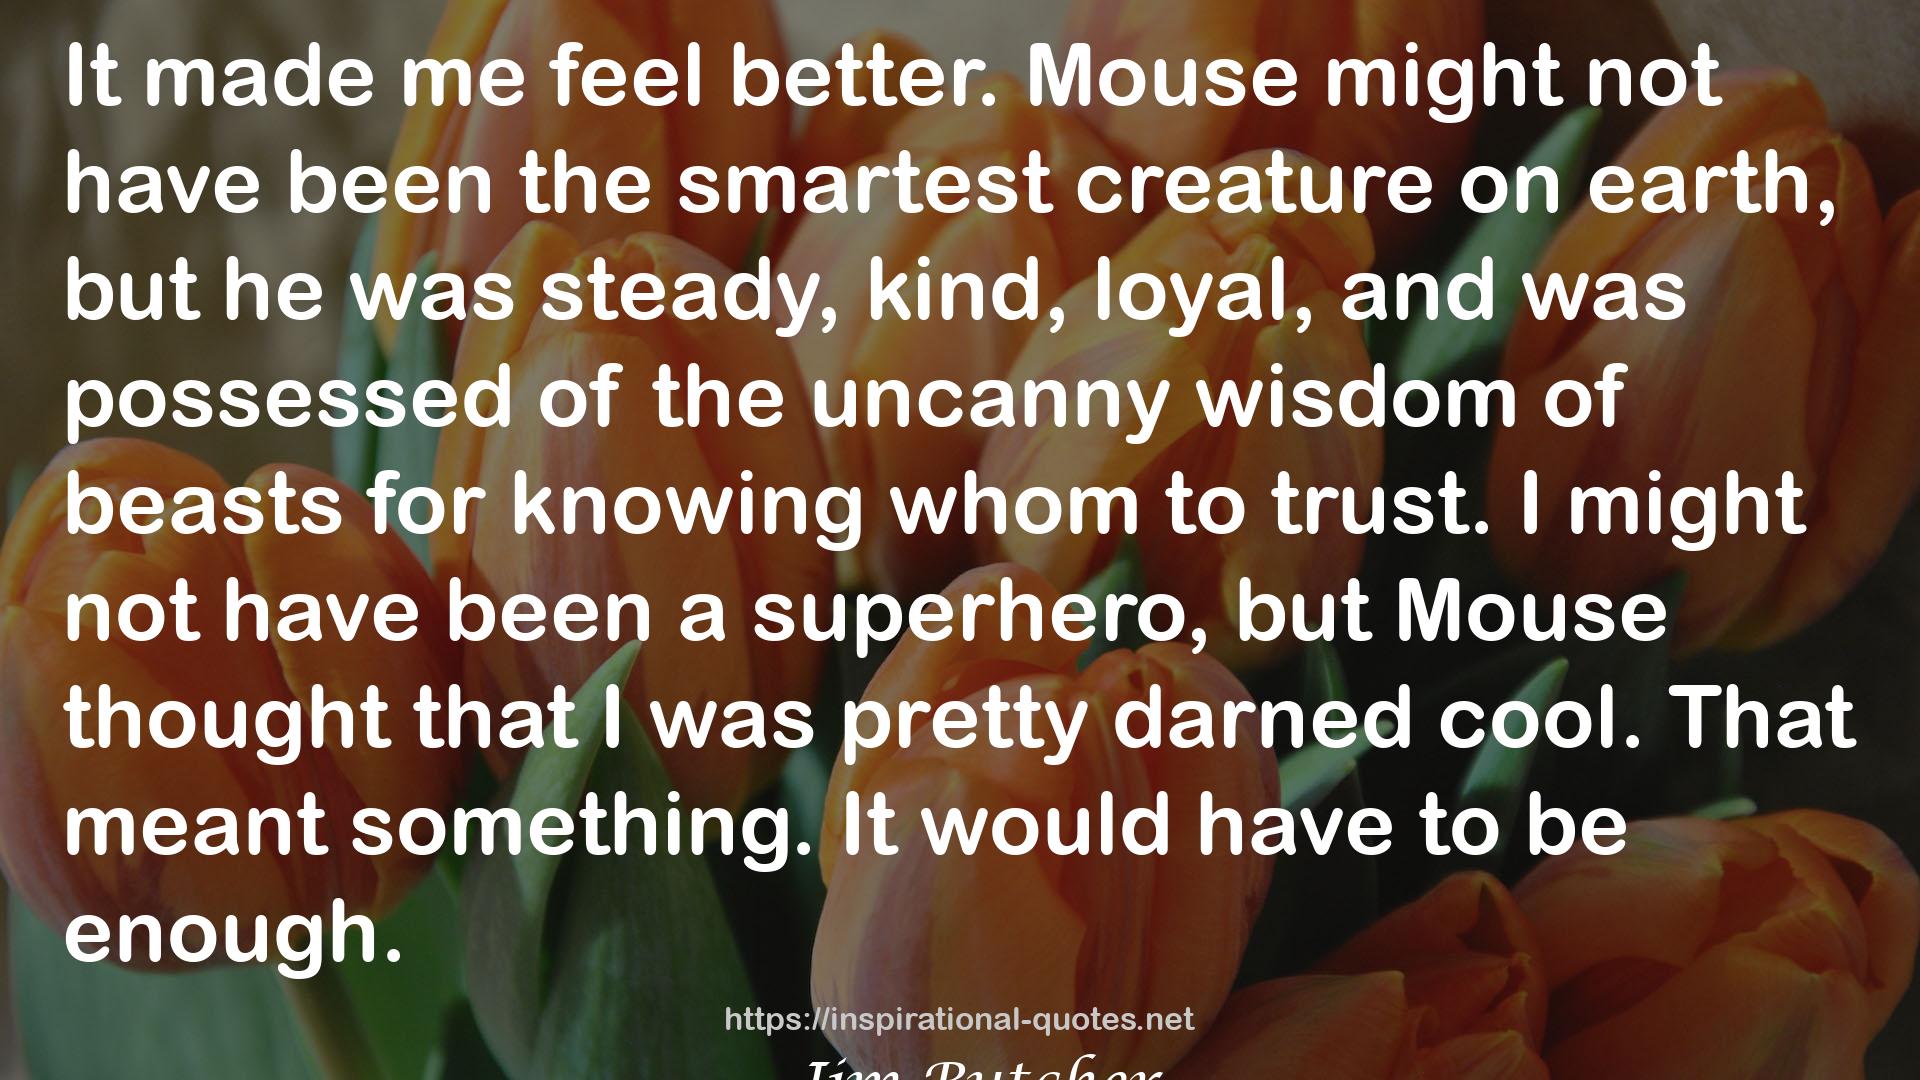 Mousethought  QUOTES